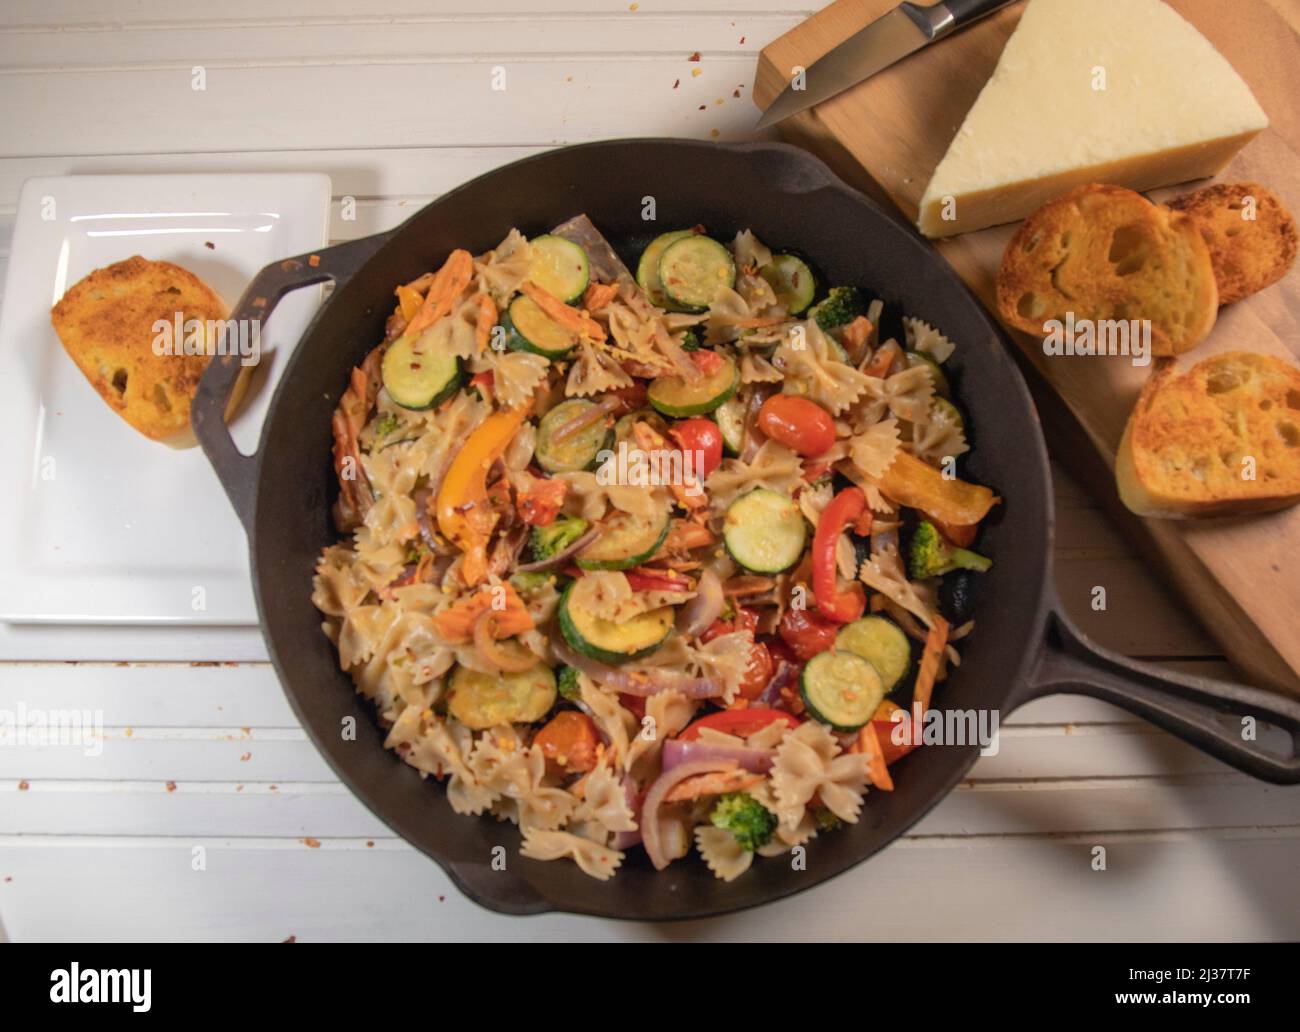 Pasta Salad With Parmesan Cheese and Garkic Bread in Cast Iron Skillet. Stock Photo